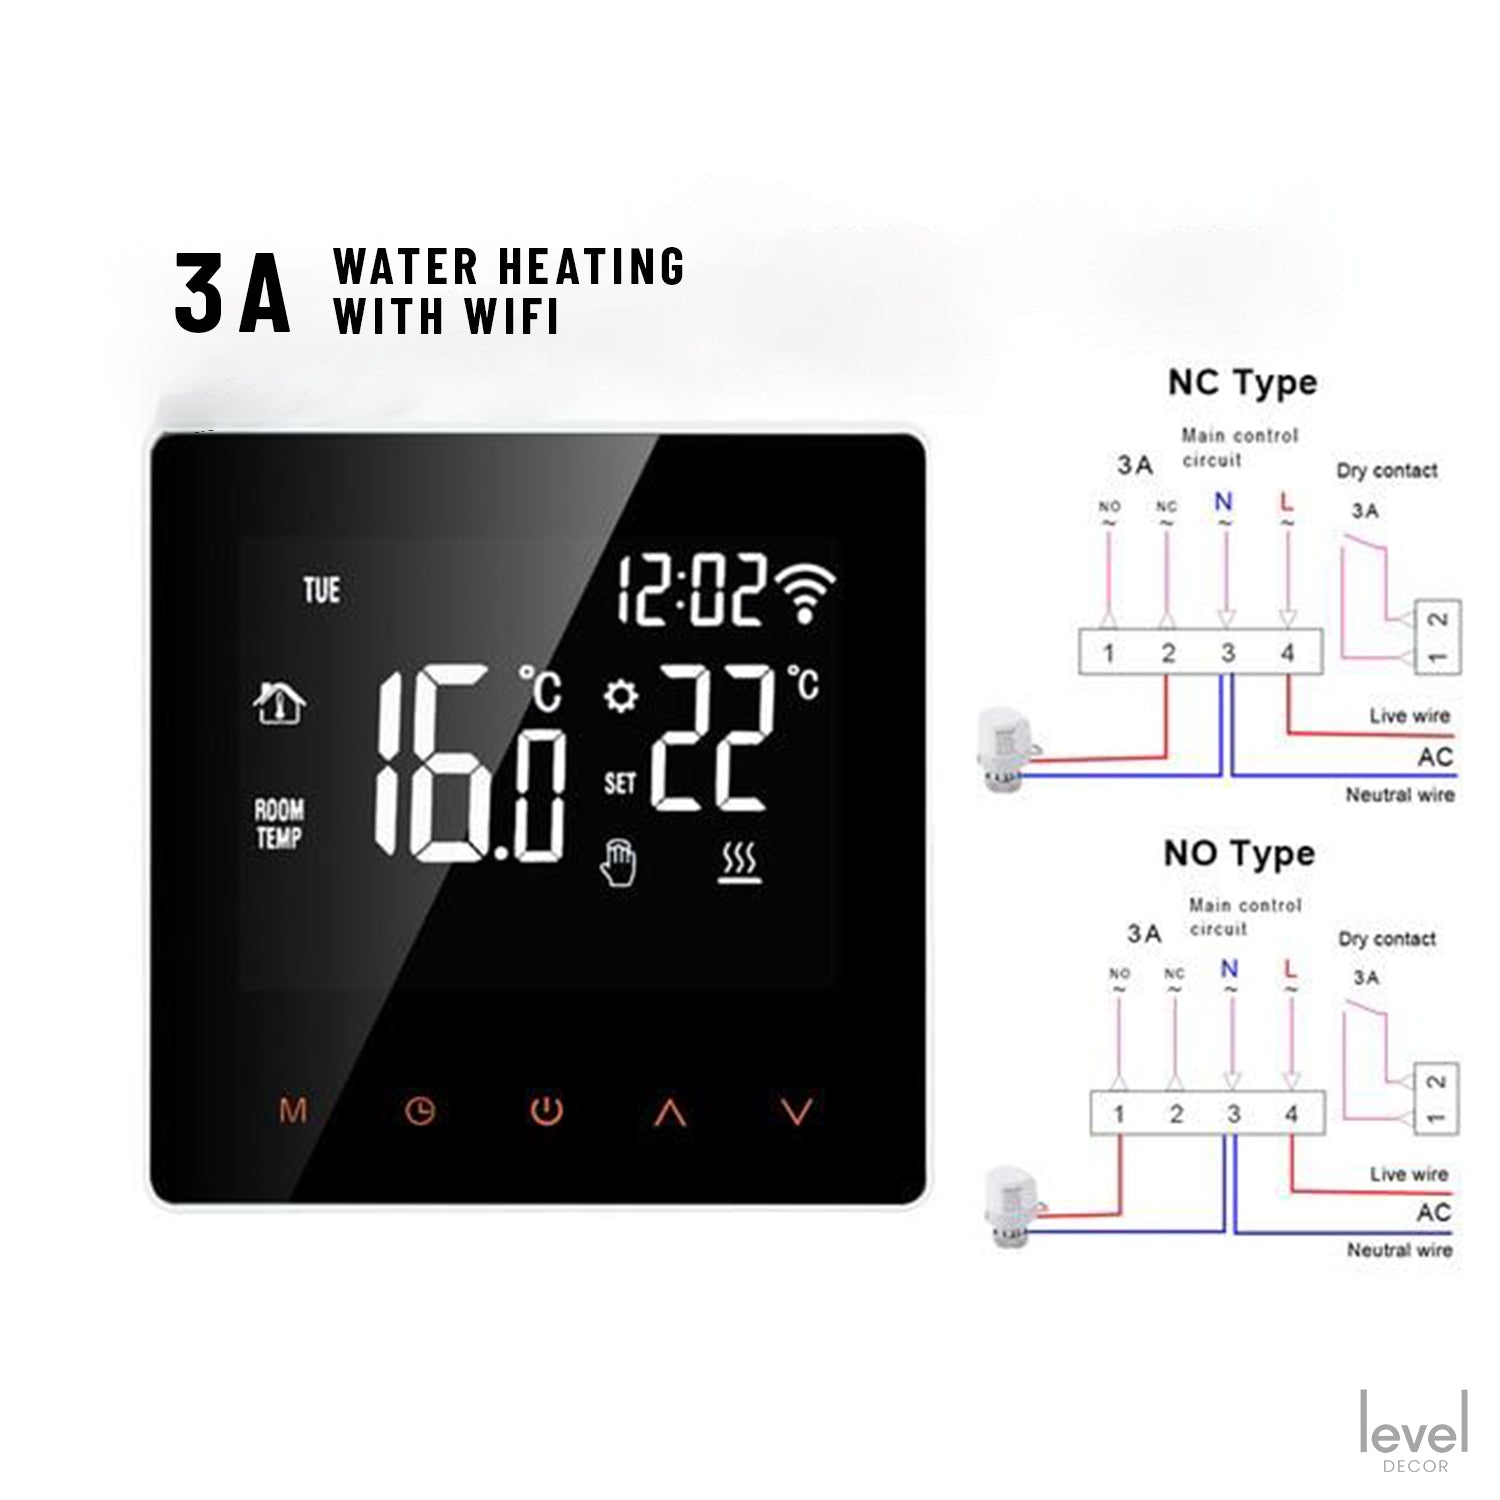 KETA WiFi Smart Thermostat | with Remote Controller for Google Home, Alexa - WiFi 3A Water Heating - Level Decor